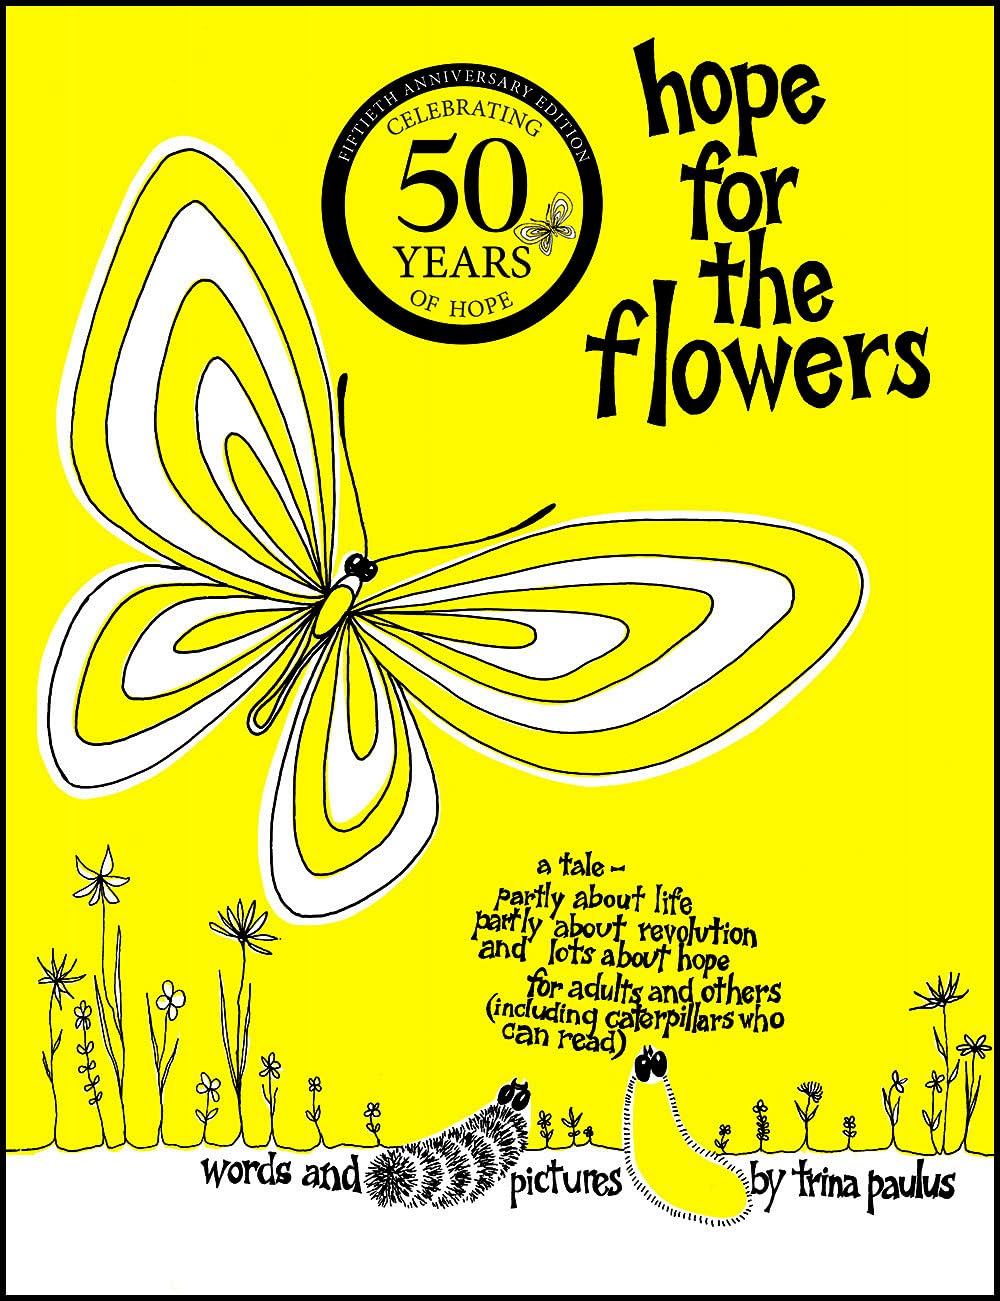 Book cover: "Hope for the Flowers."